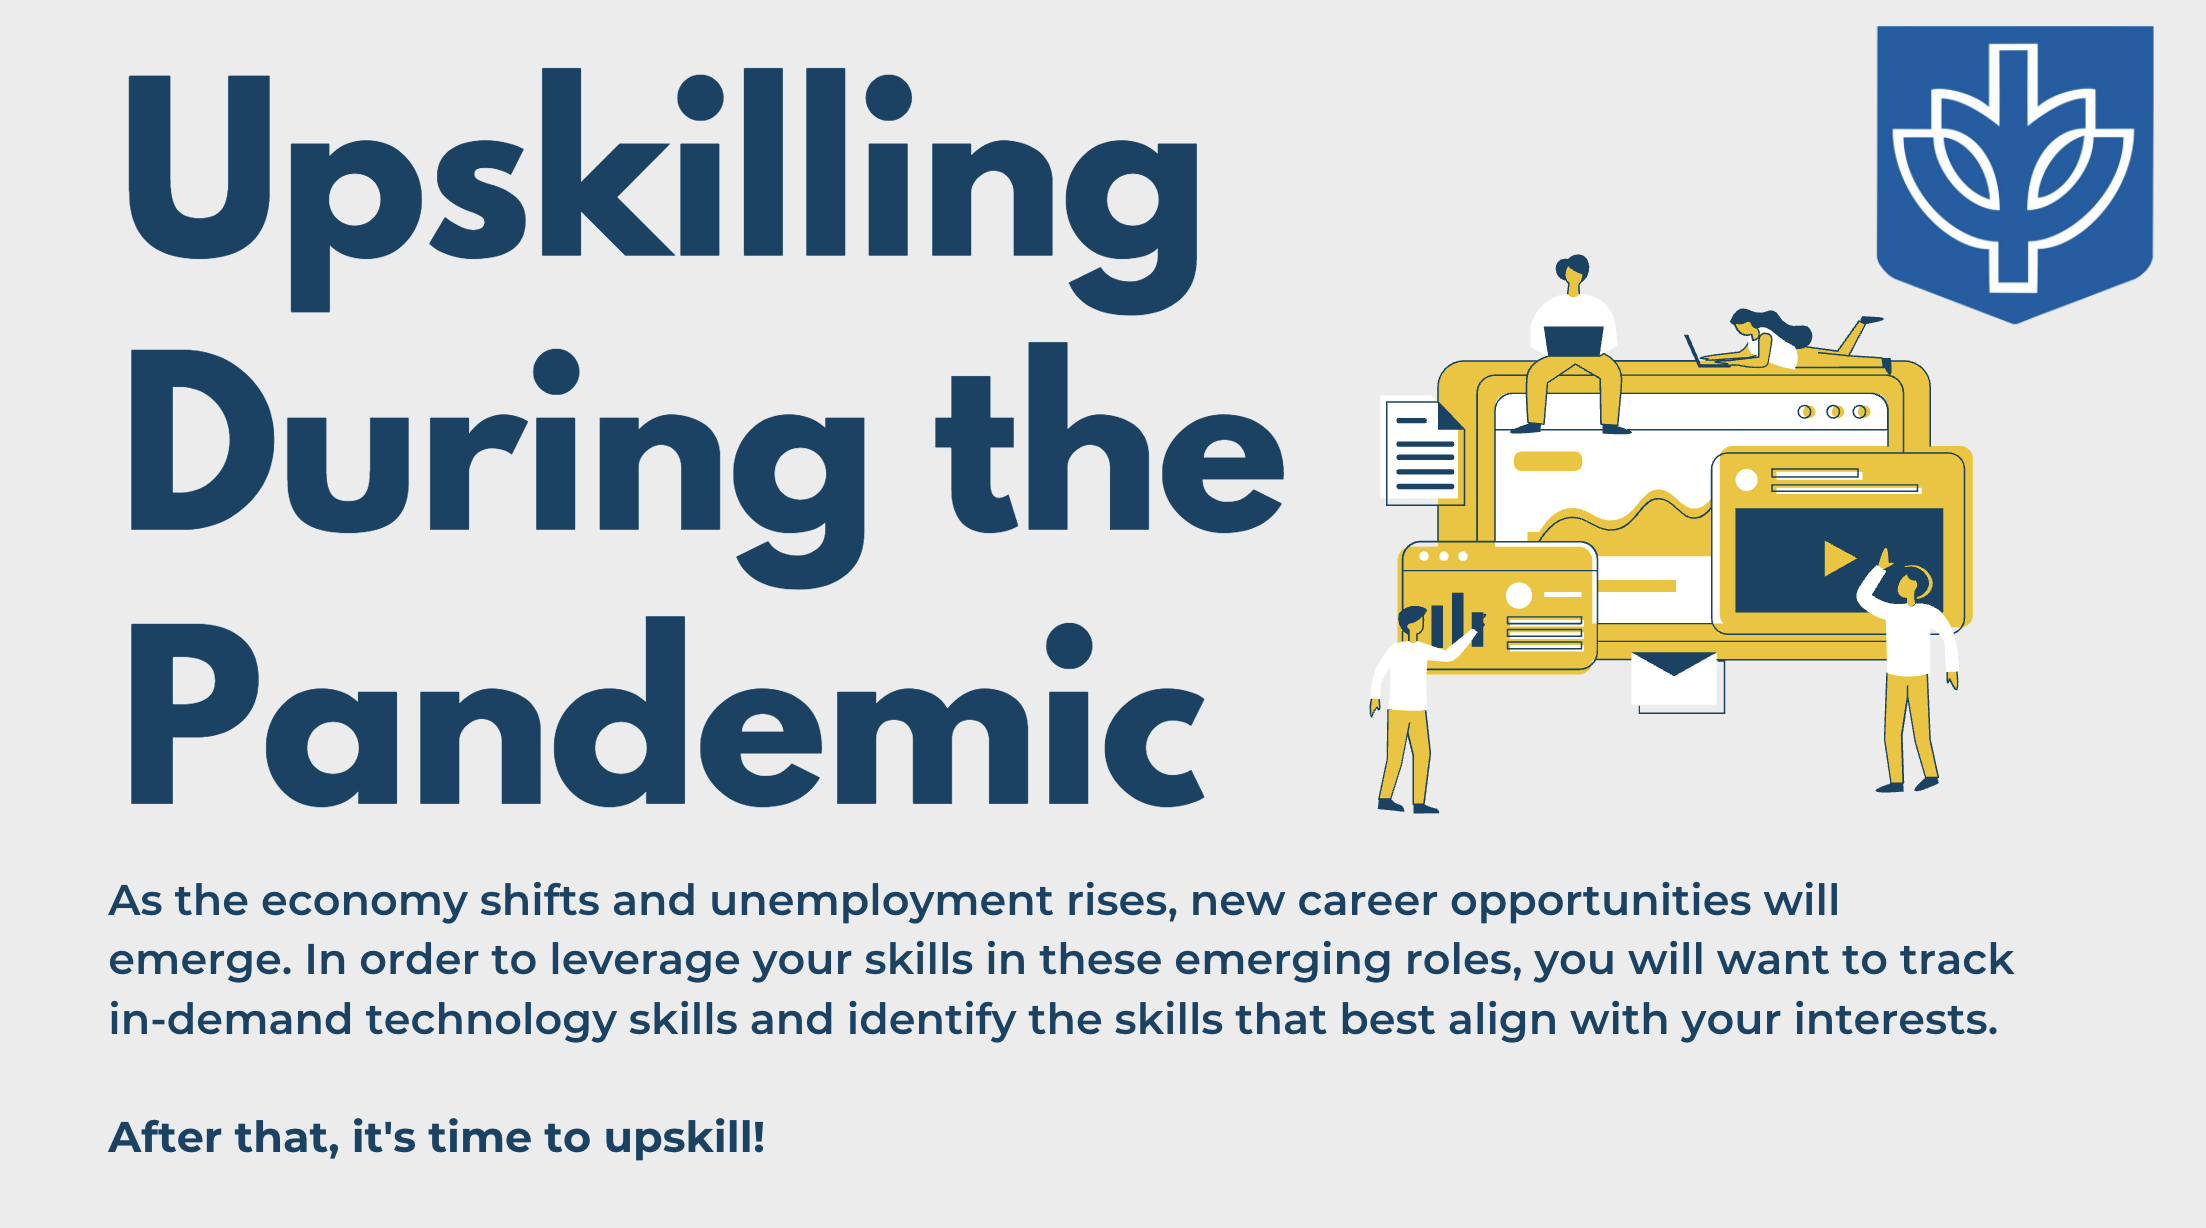 Upskilling During the Pandemic